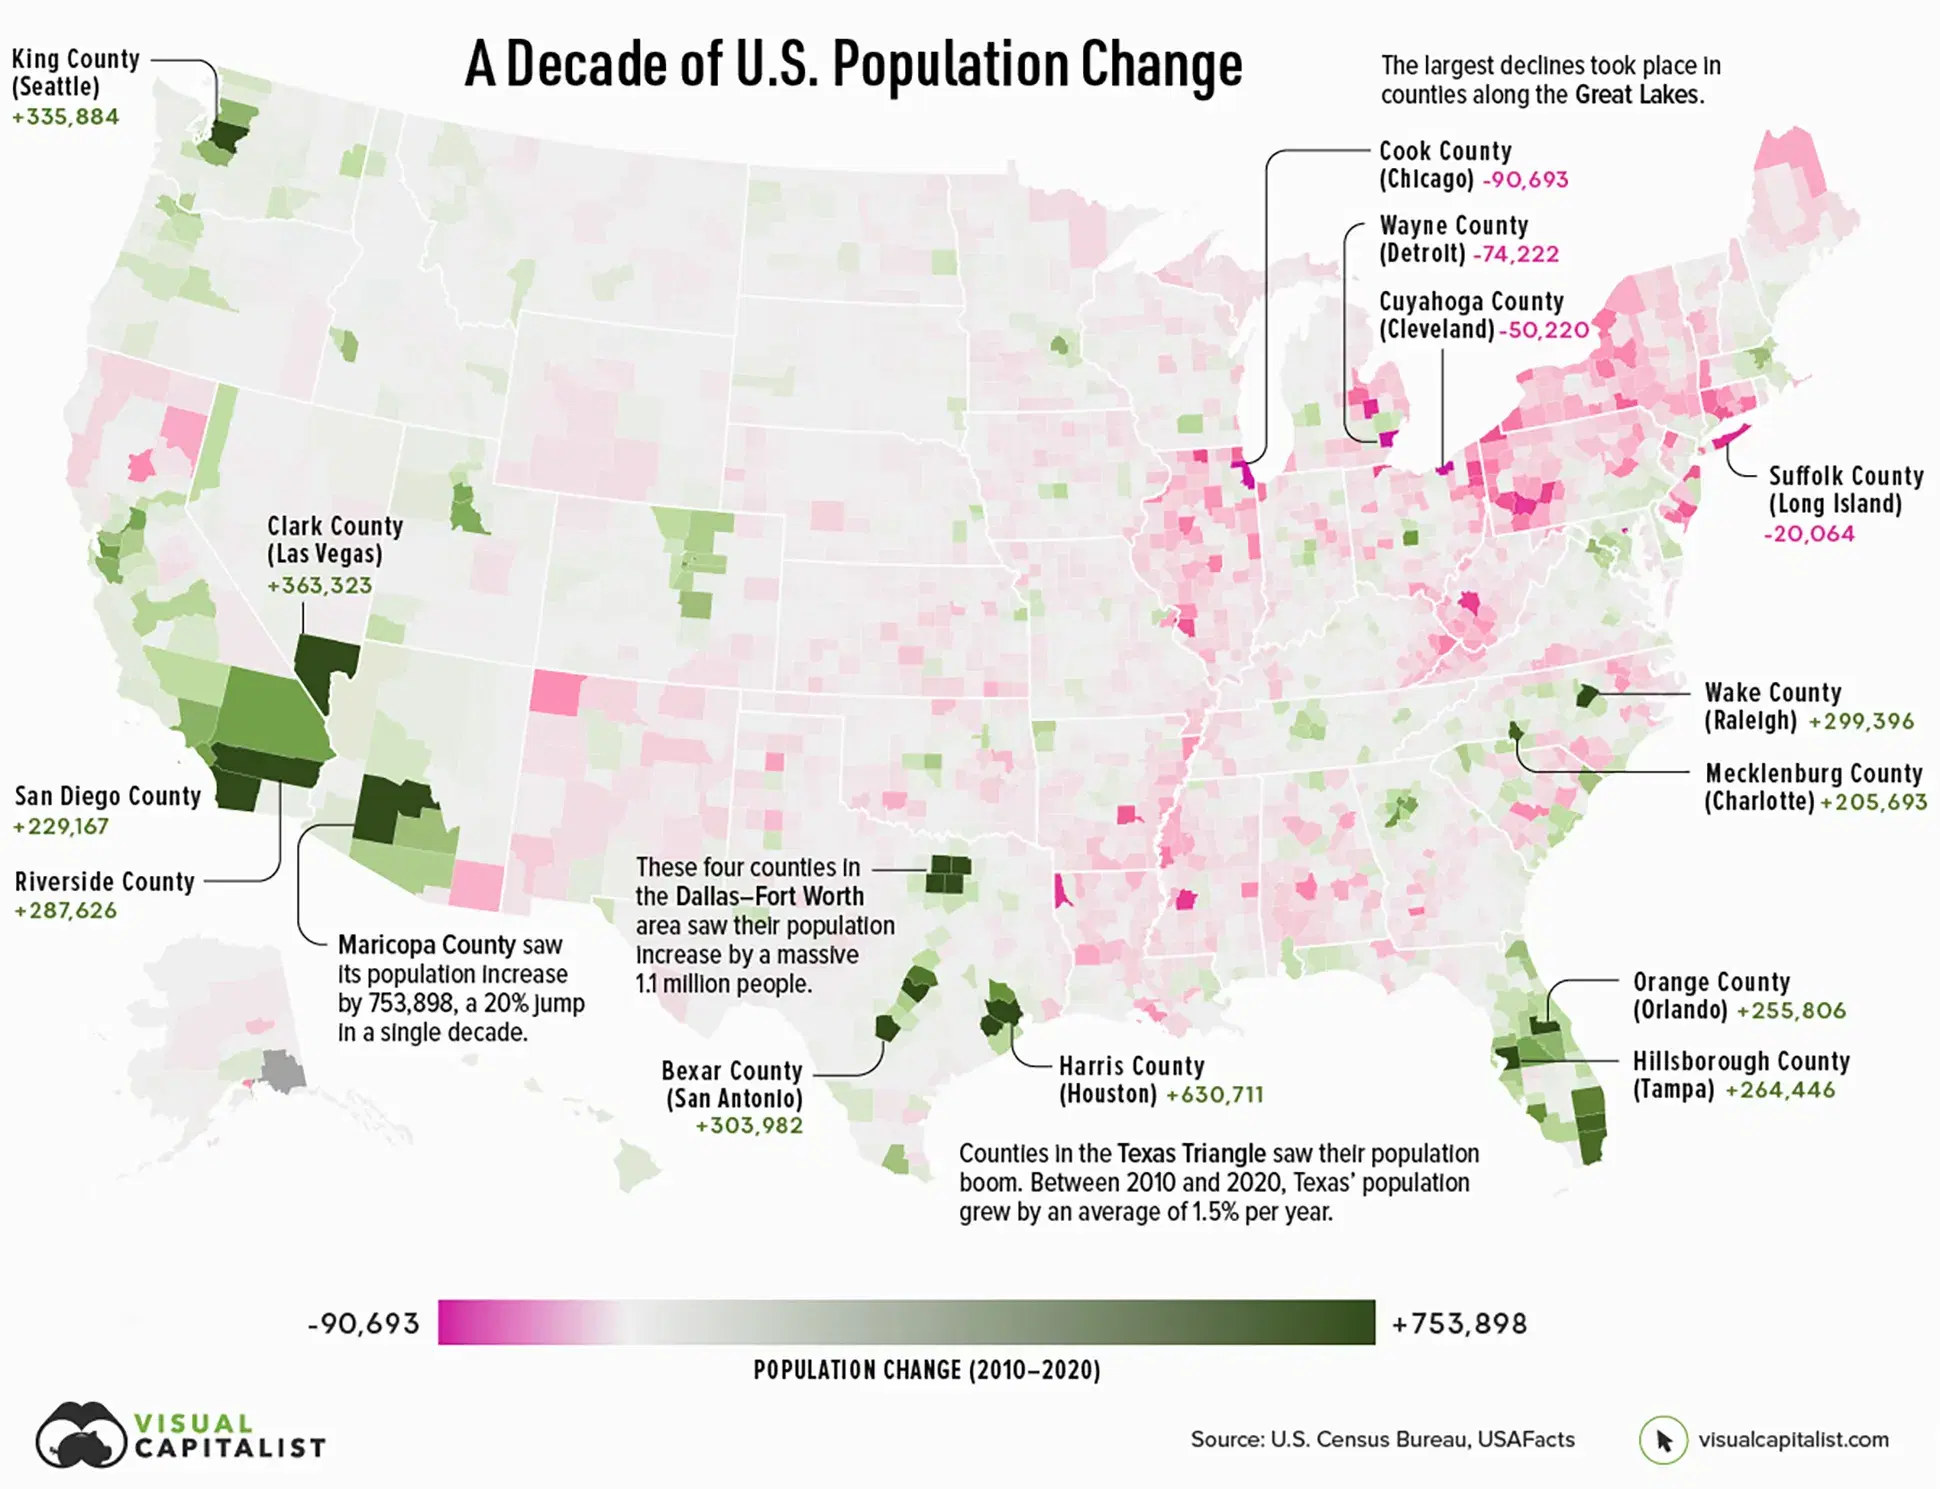 A Decade of Population Growth and Decline in U.S. Counties